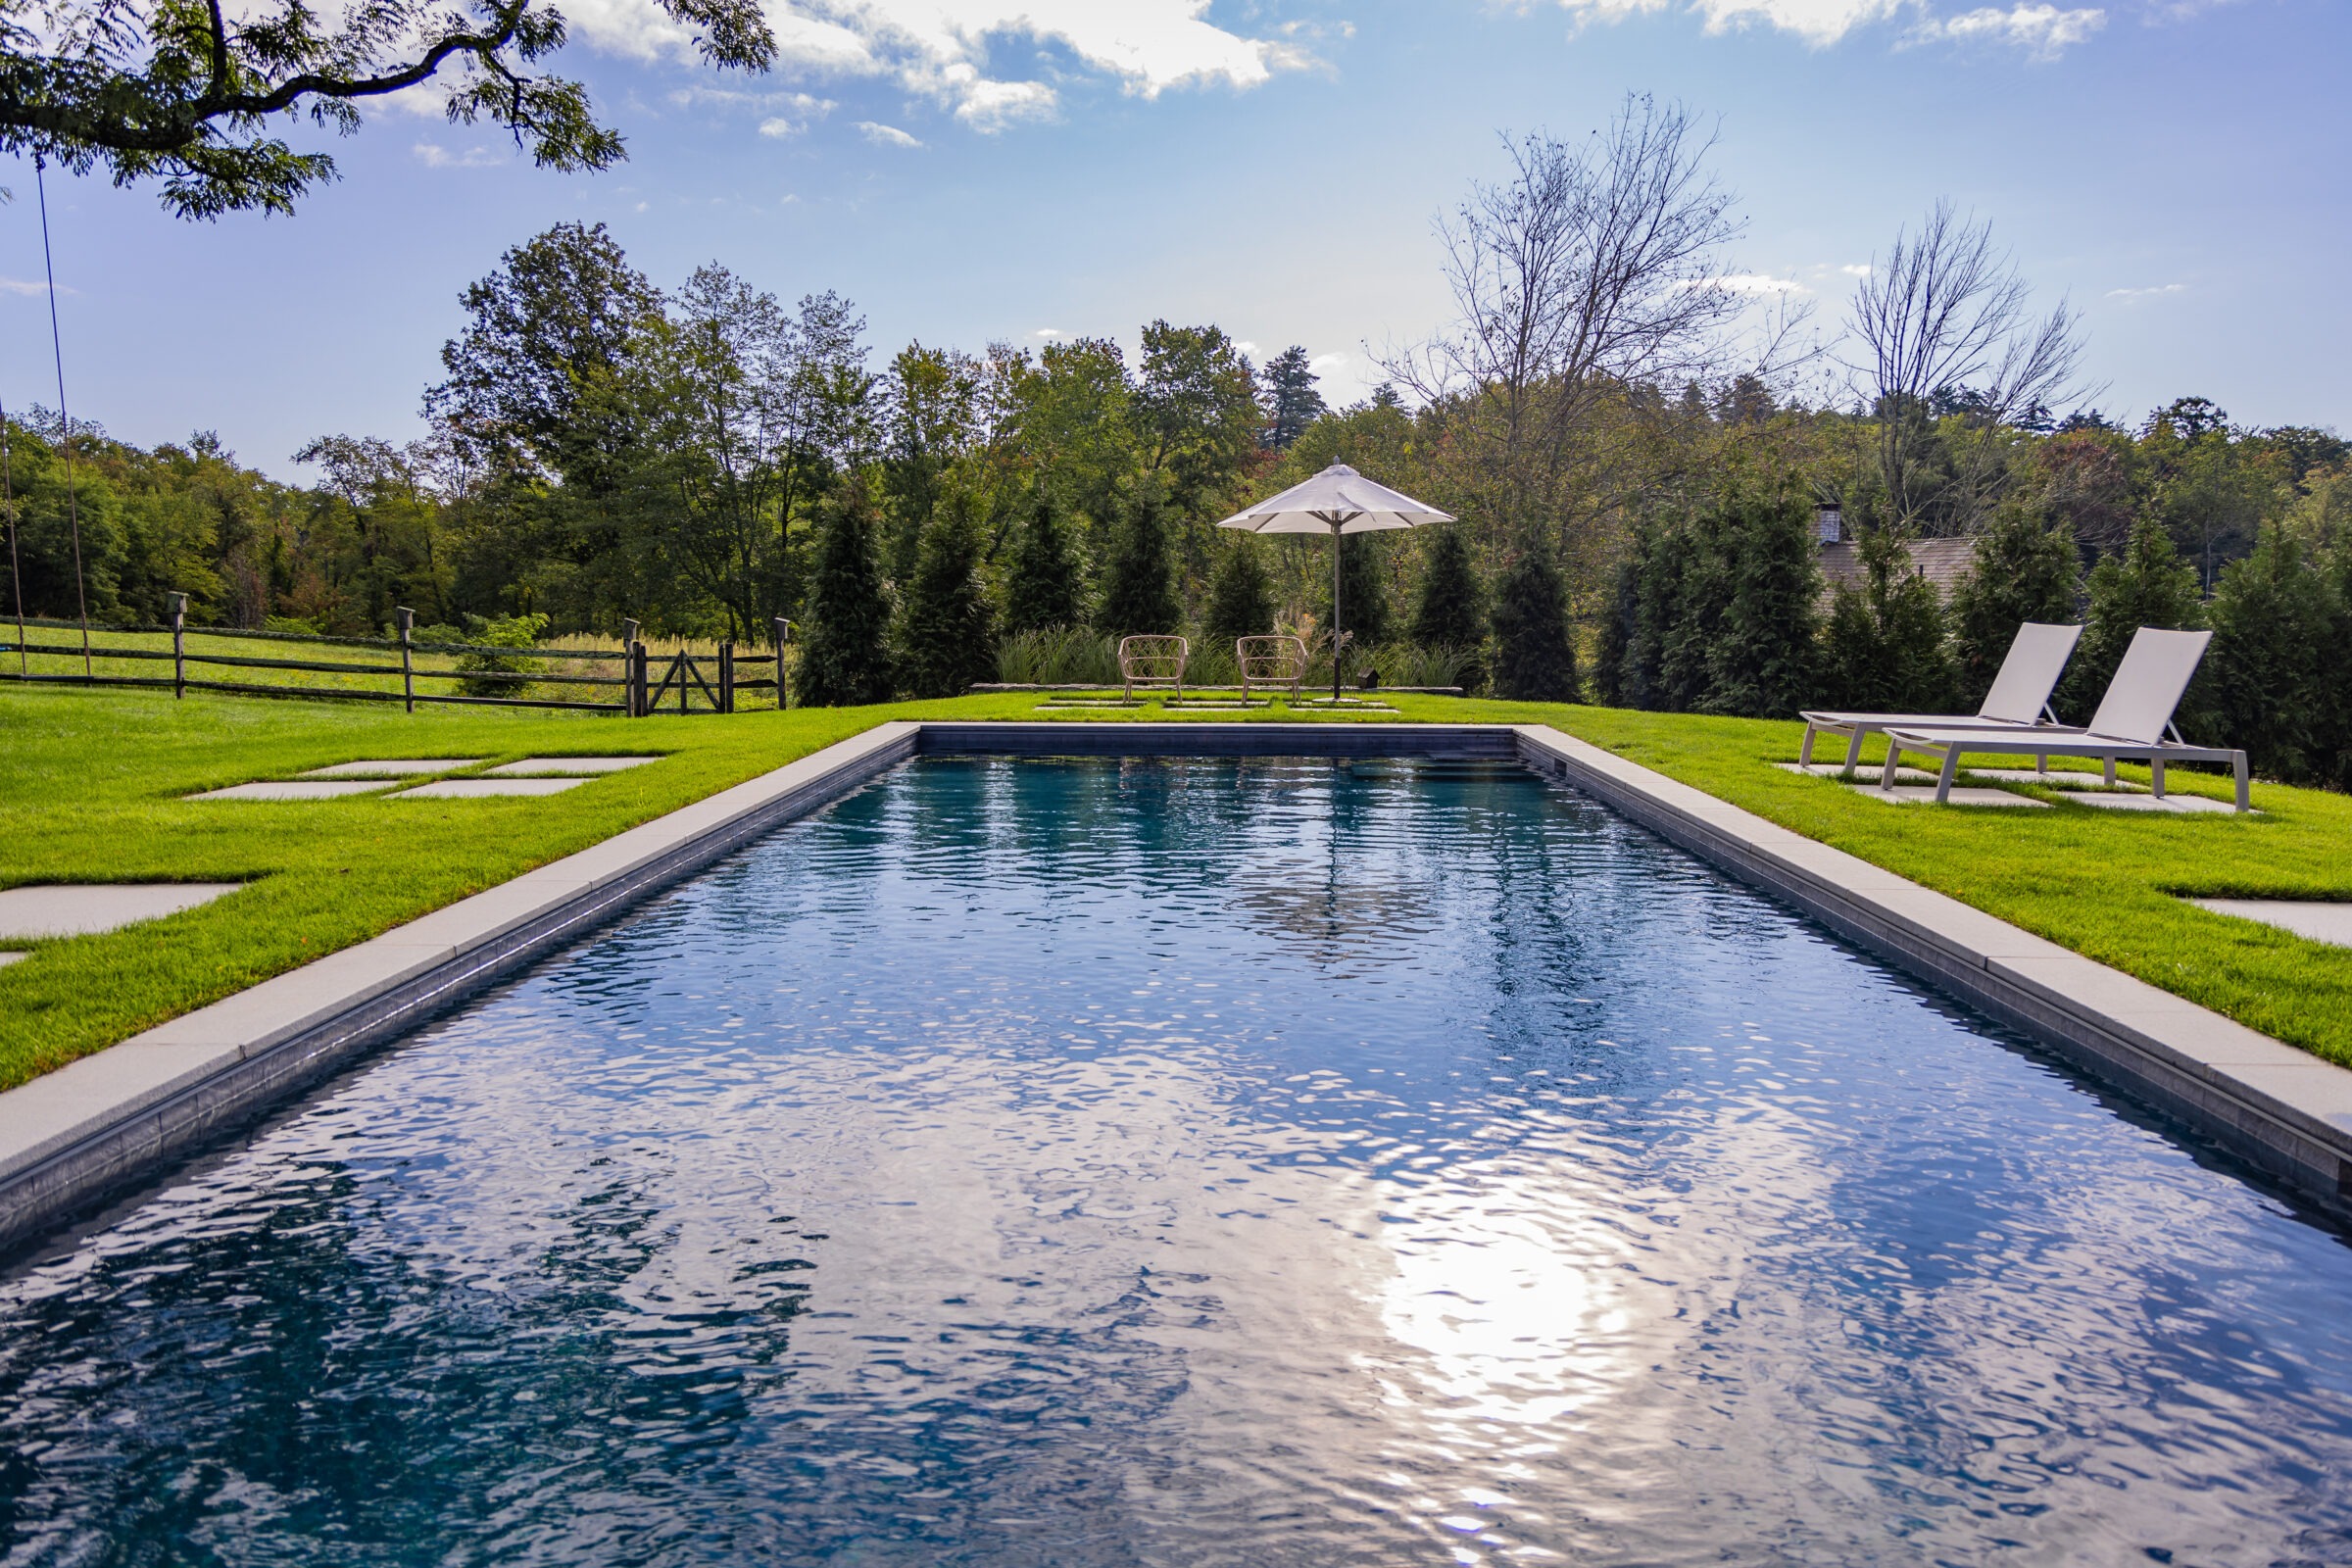 A serene outdoor swimming pool with loungers and an umbrella, surrounded by a well-manicured lawn, trees, and a clear blue sky.